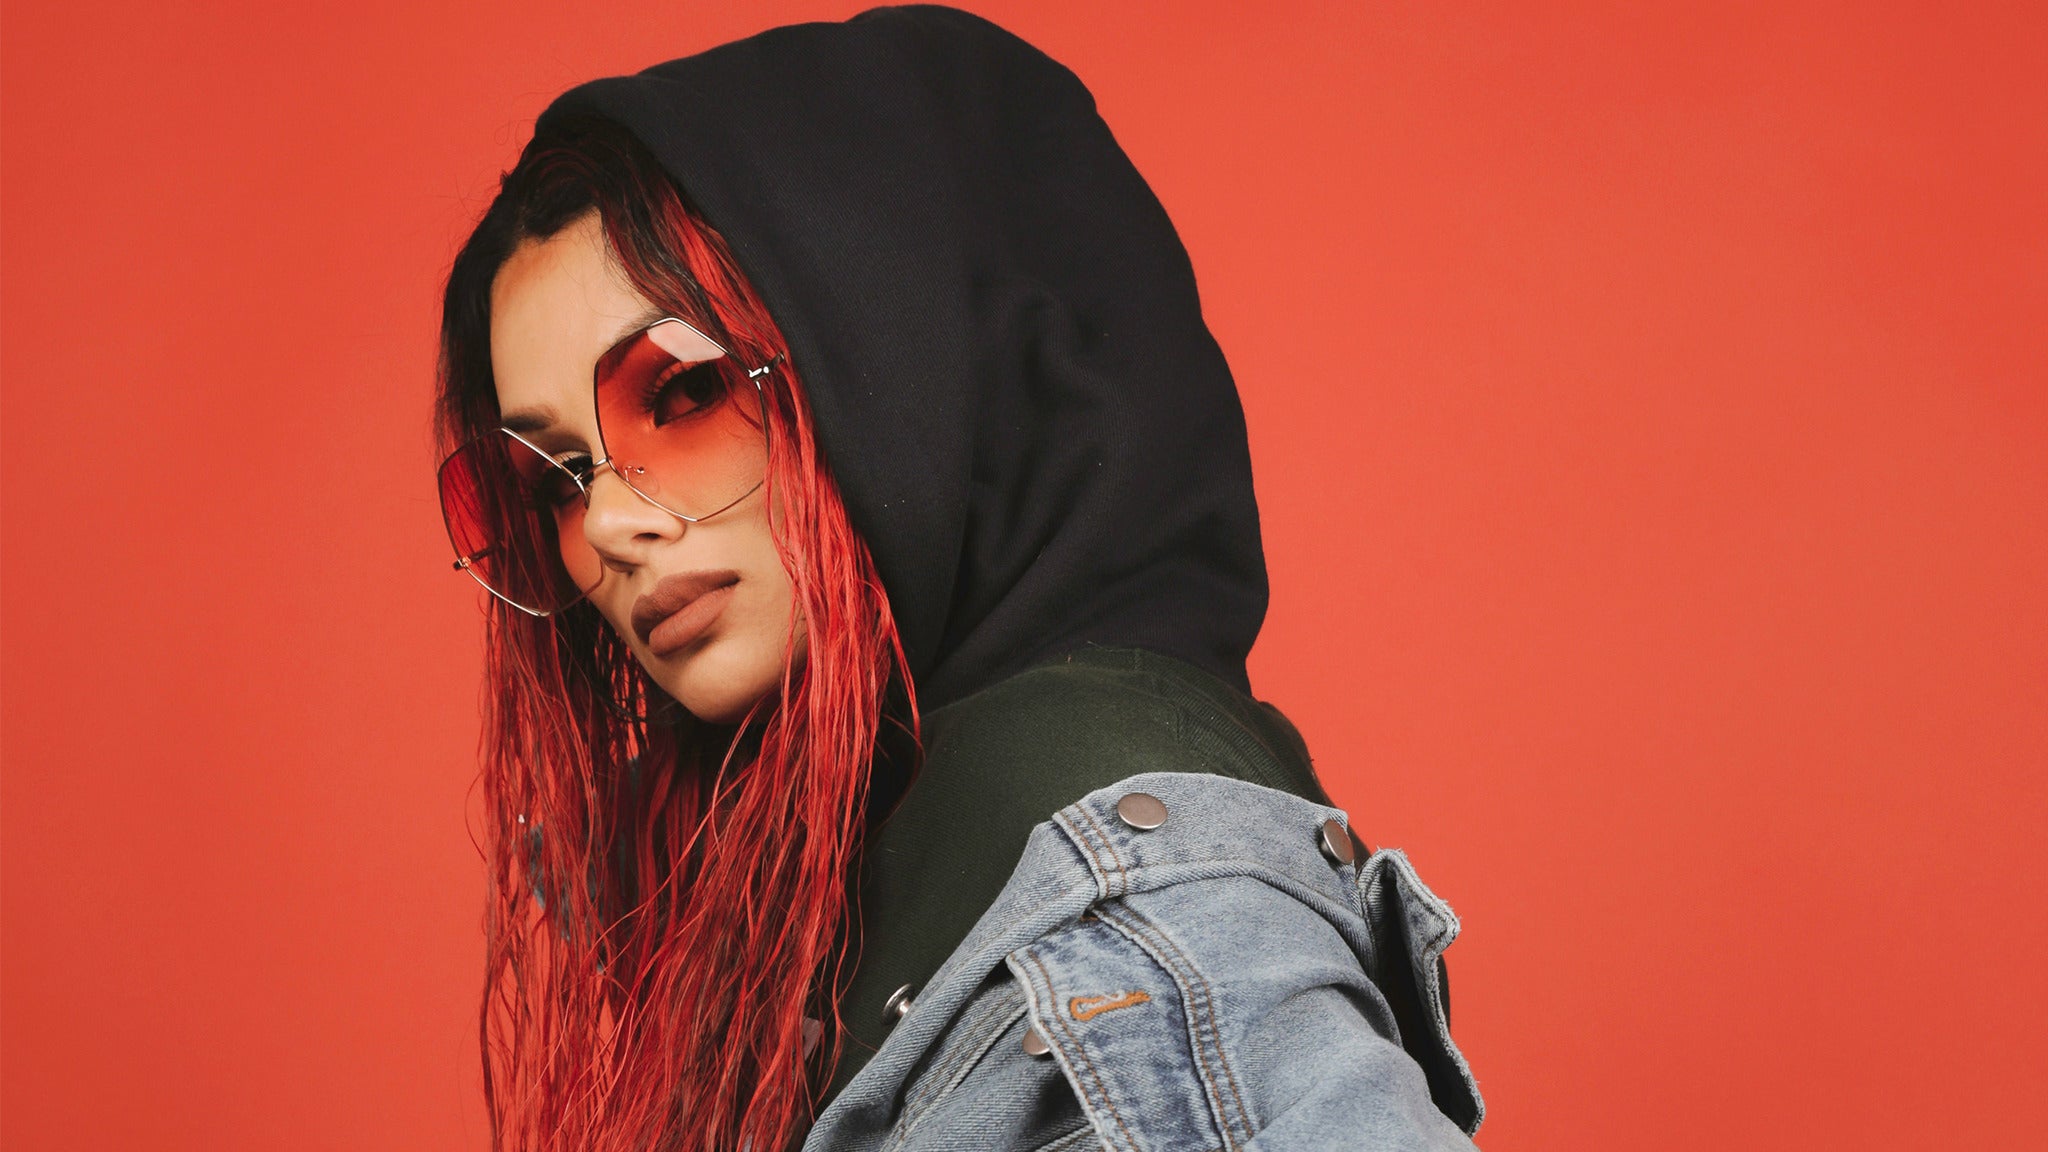 Snow Tha Product at Knitting Factory Concert House - Boise - Boise, ID 83702